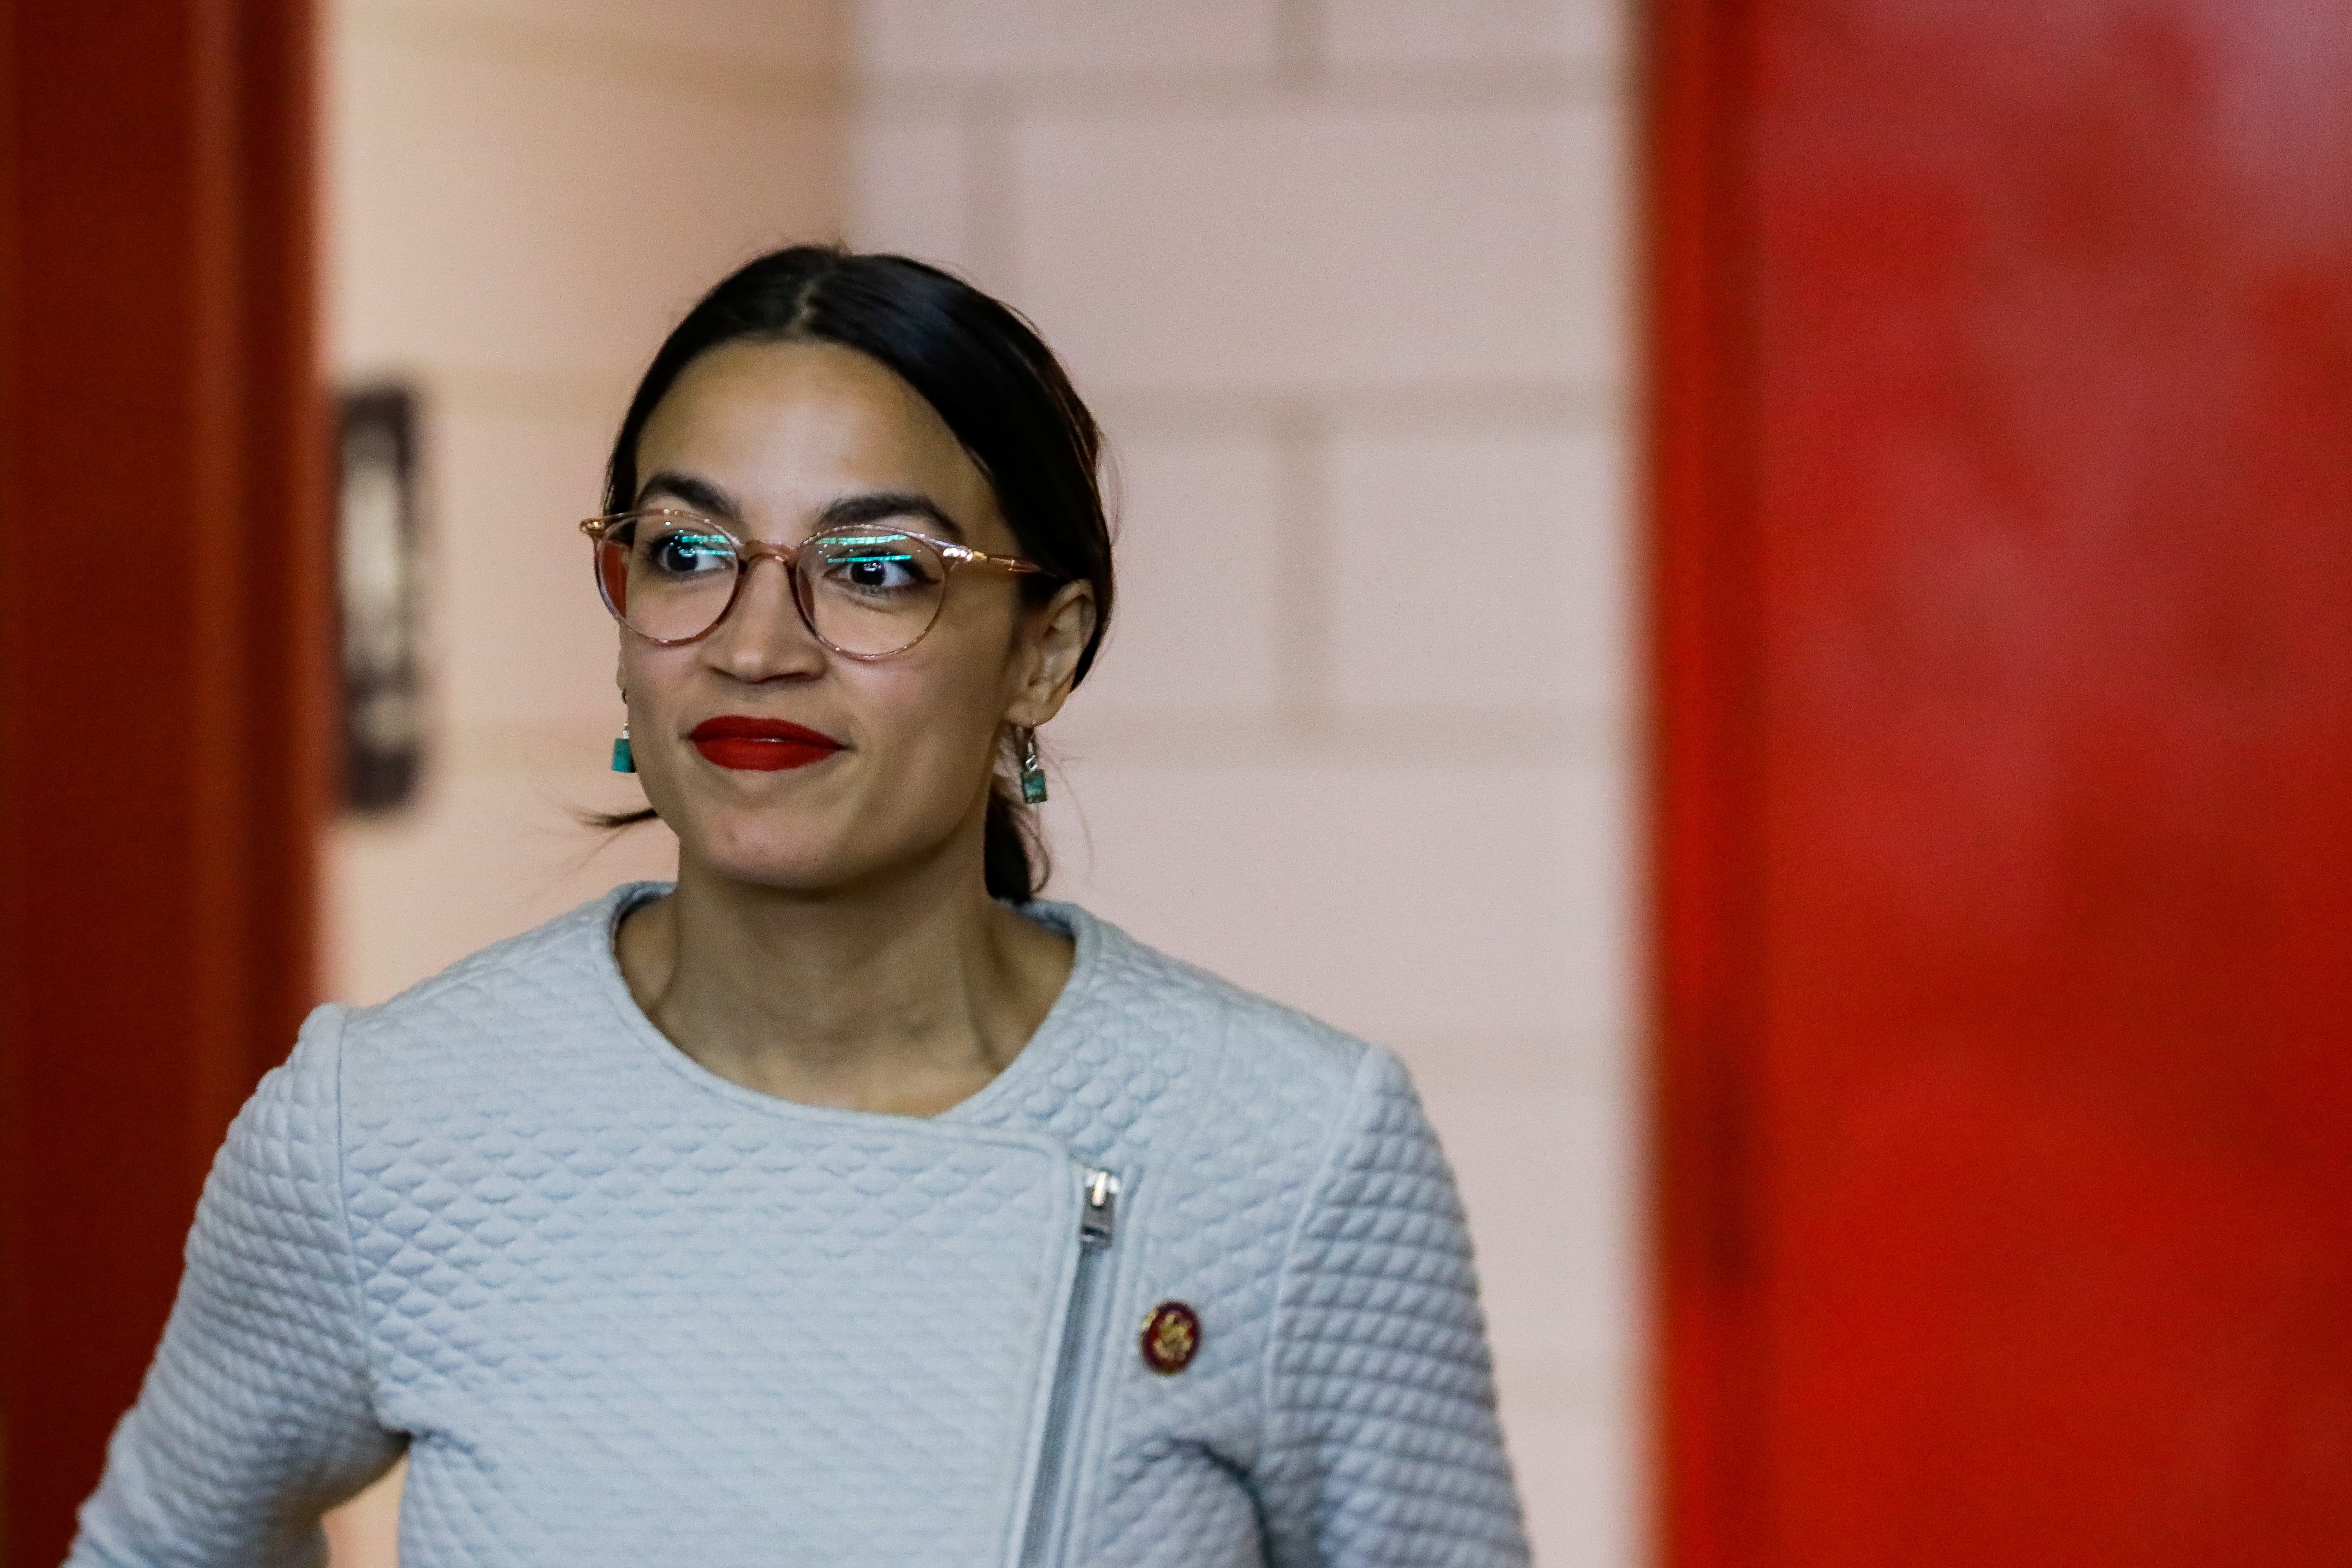 U.S. Representative Alexandria Ocasio-Cortez (D-NY) arrives before the town hall meeting in the Queens borough of New York City